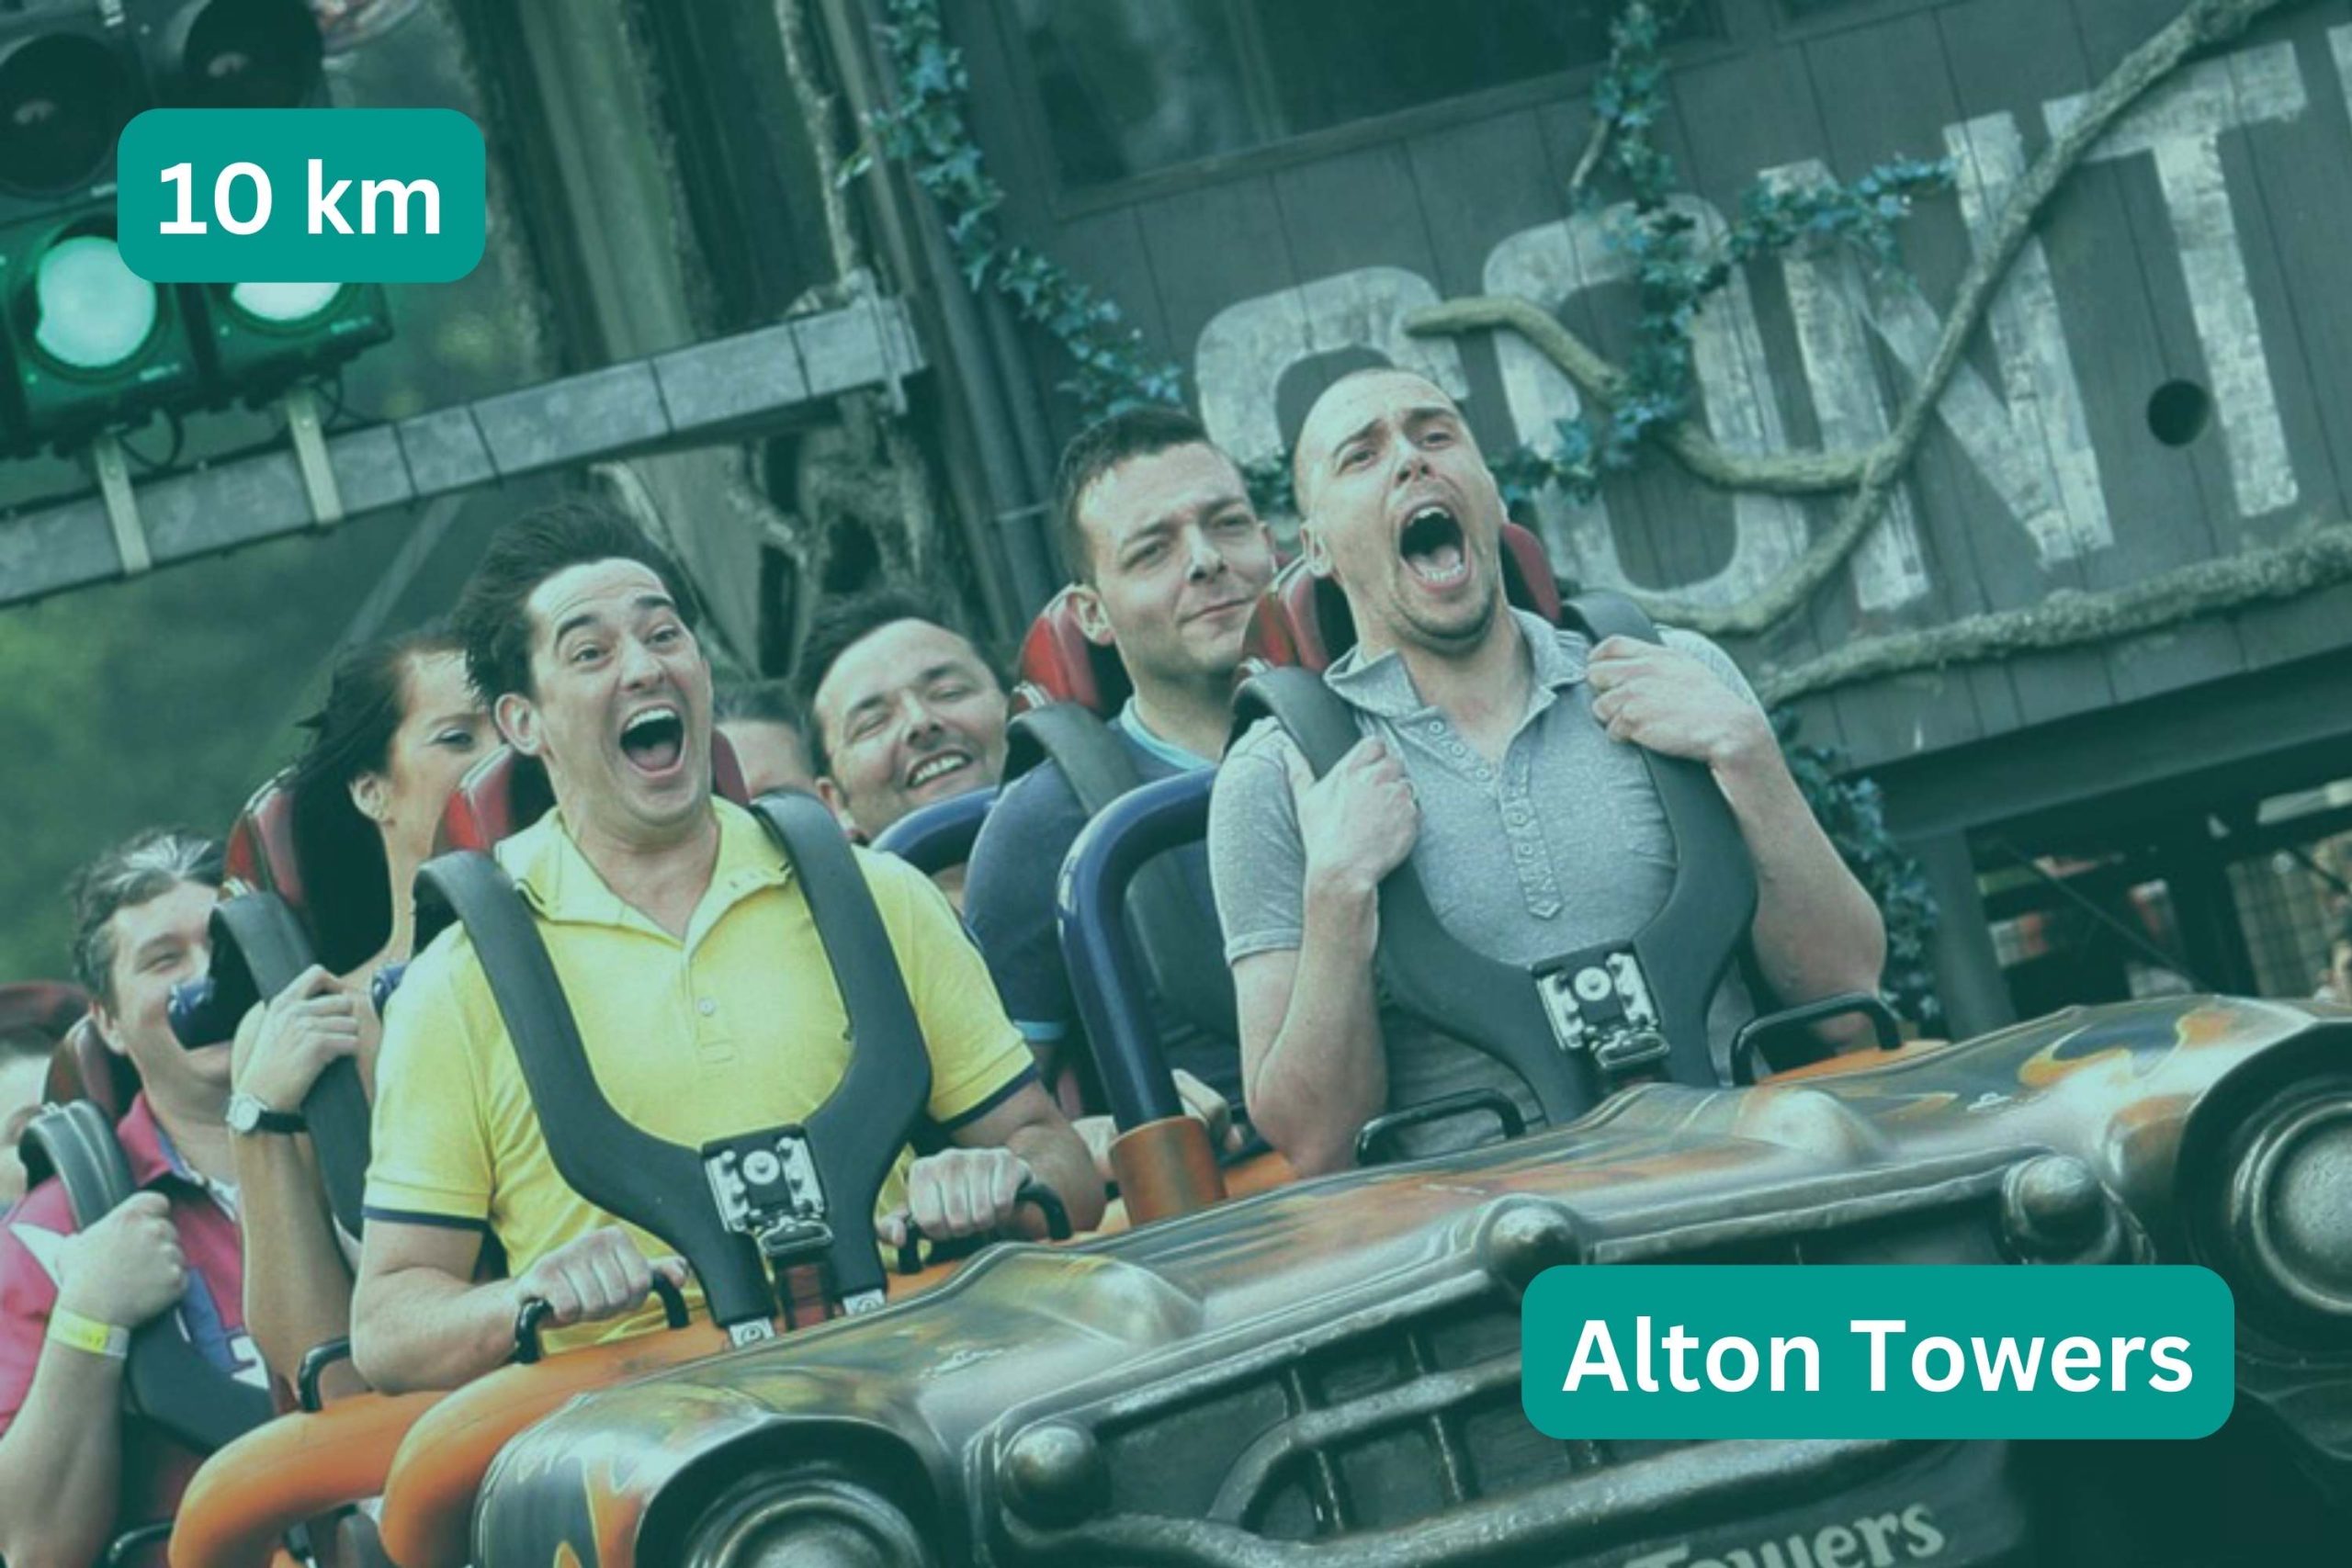 People on roller coaster in Alton Towers. Title text 10km, Alton Towers